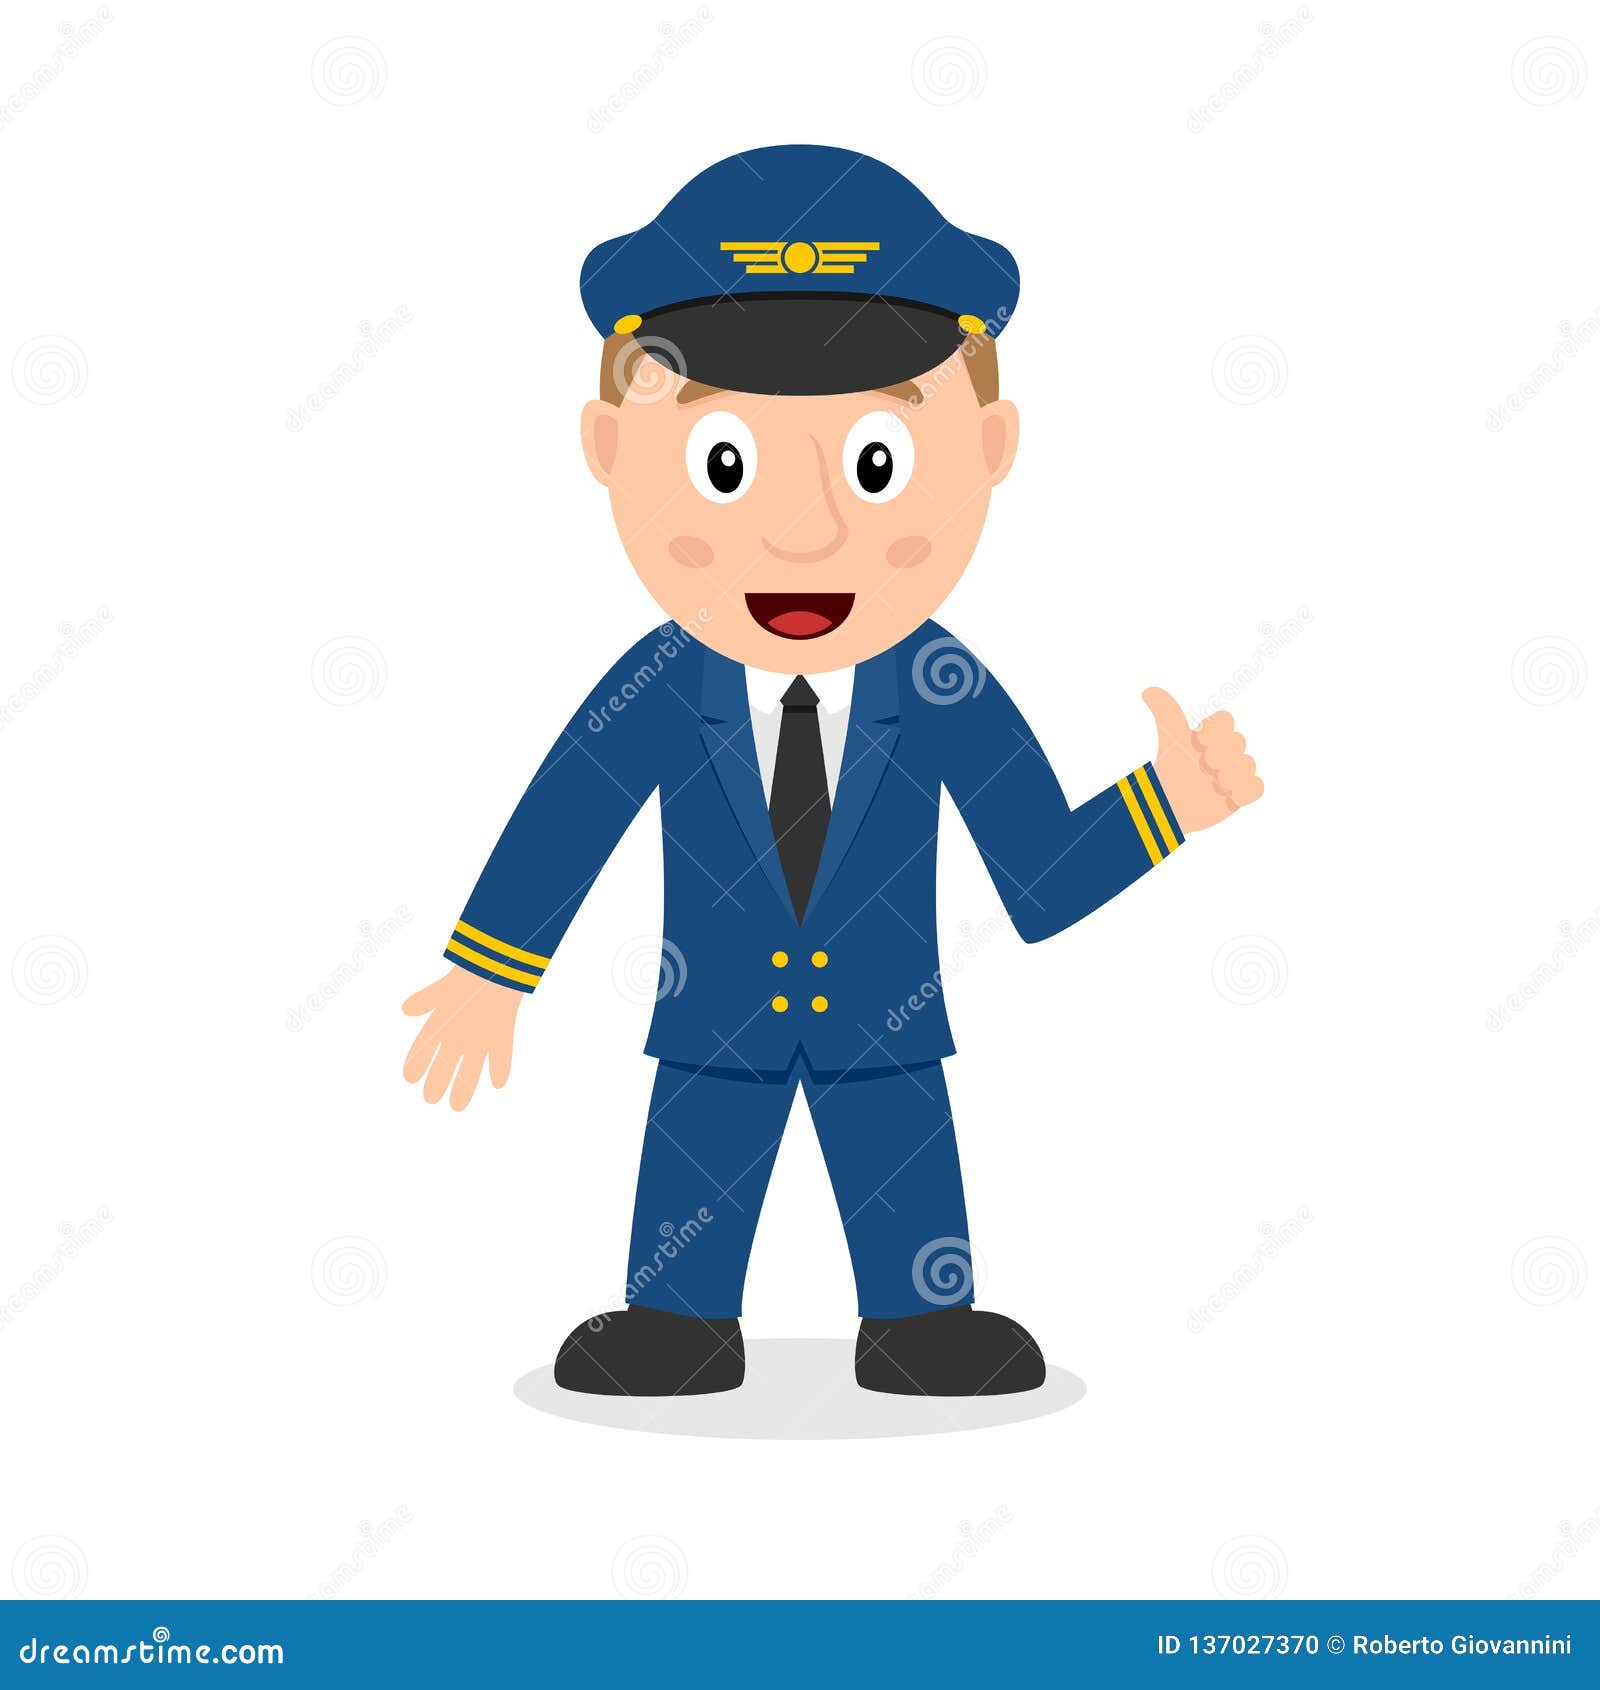 Jet Pilot Cartoon Character with Thumbs Up Stock Vector - Illustration of  thumbsup, profession: 137027370